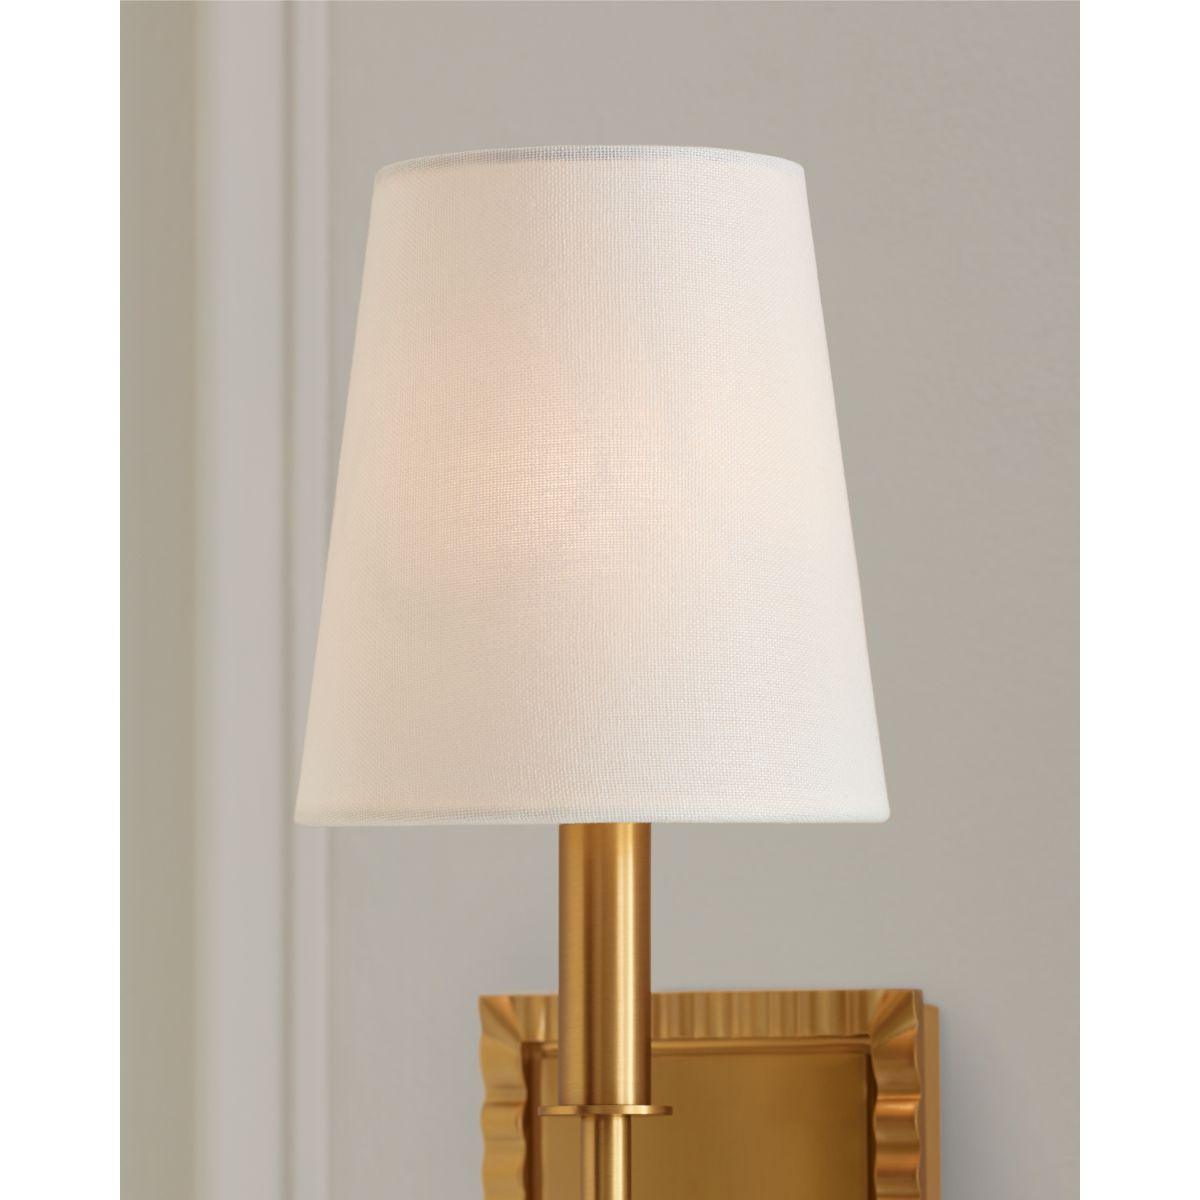 GENERATION LIGHTING Baxley Sconce Burnished Brass AW1051BBS